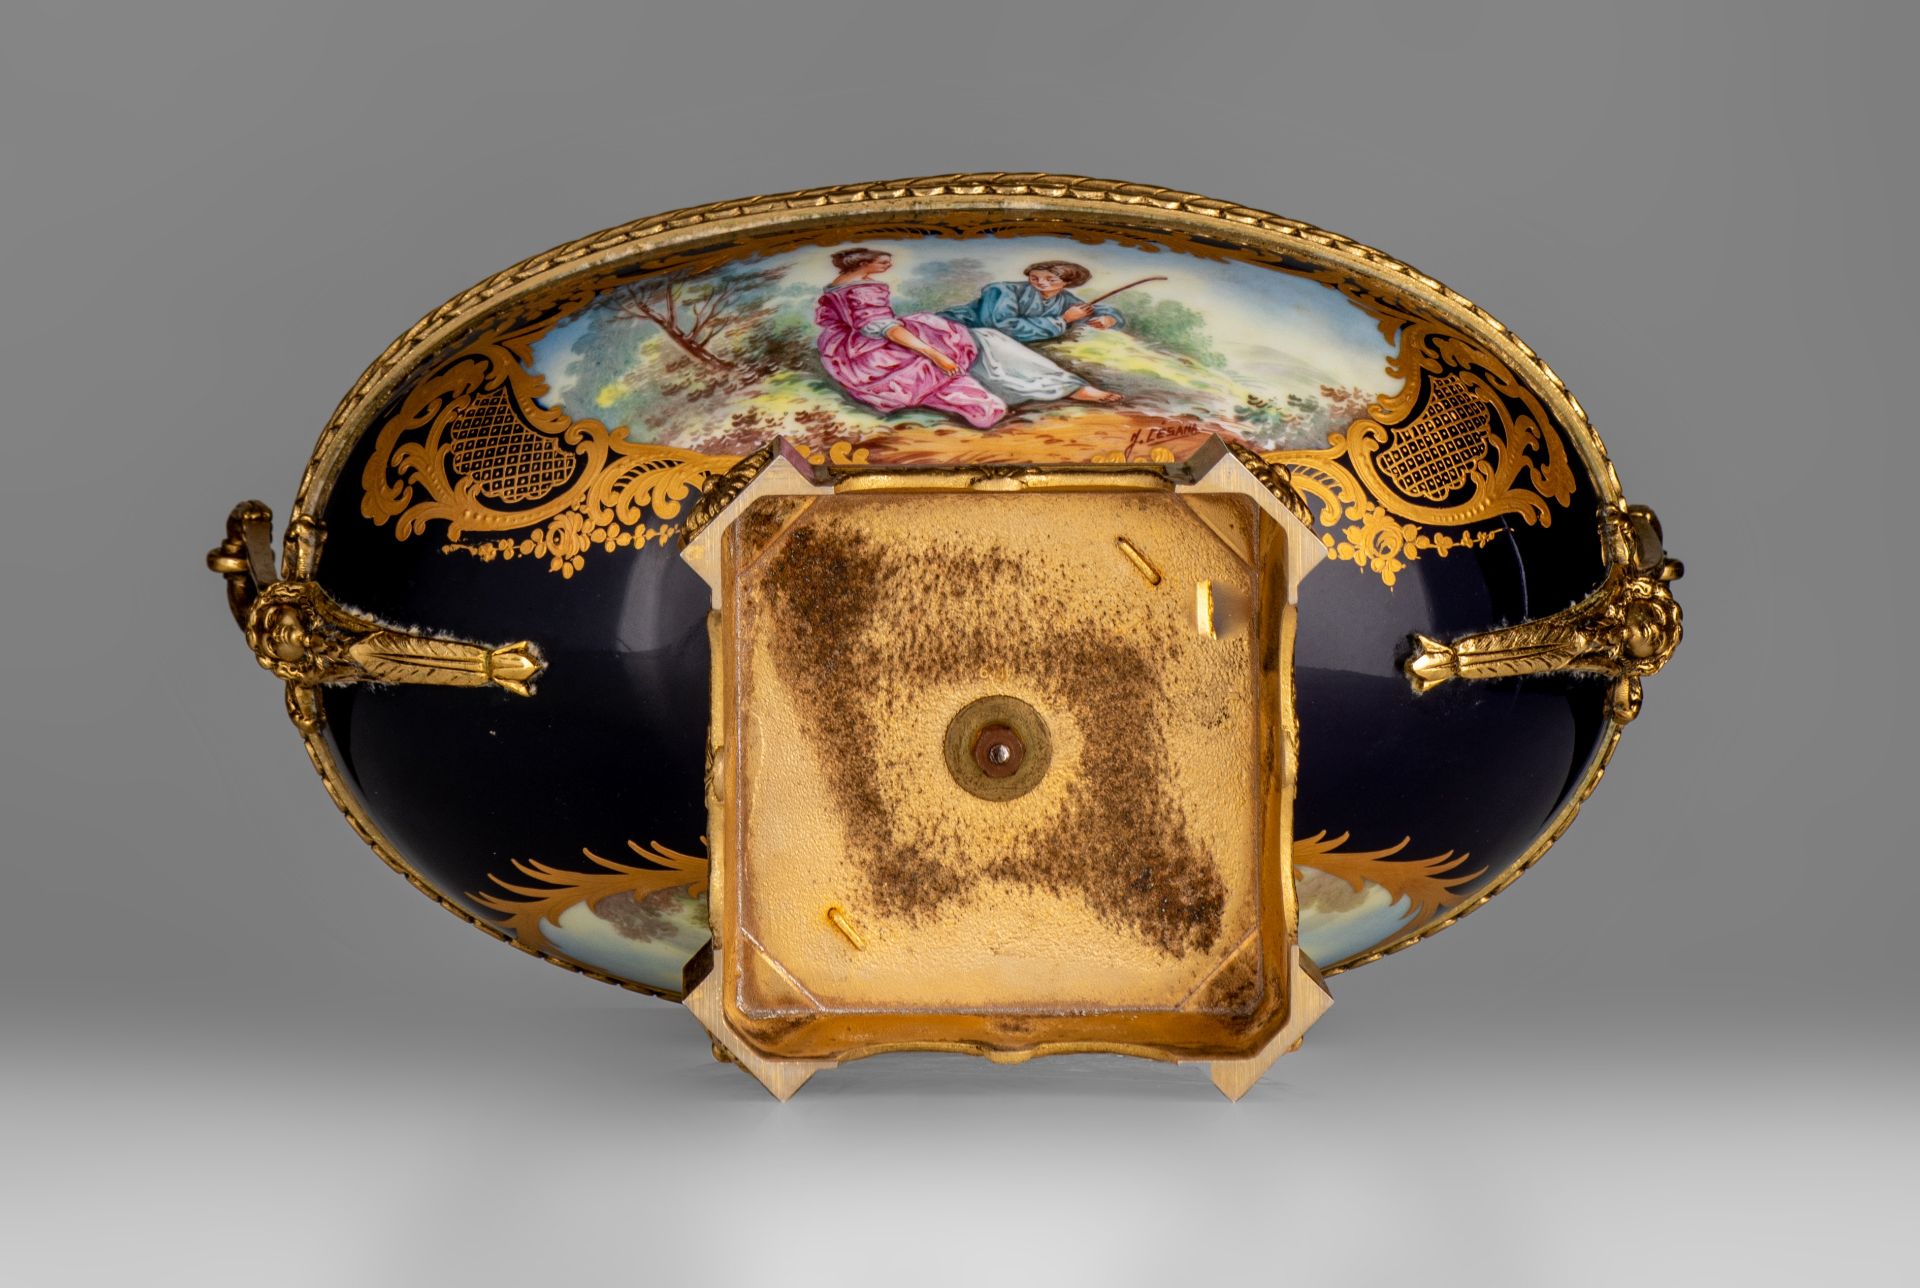 A three-piece Sèvres garniture set, decorated with gallant scenes, signed 'J. Césana', H 28,5 - 42,5 - Image 7 of 15